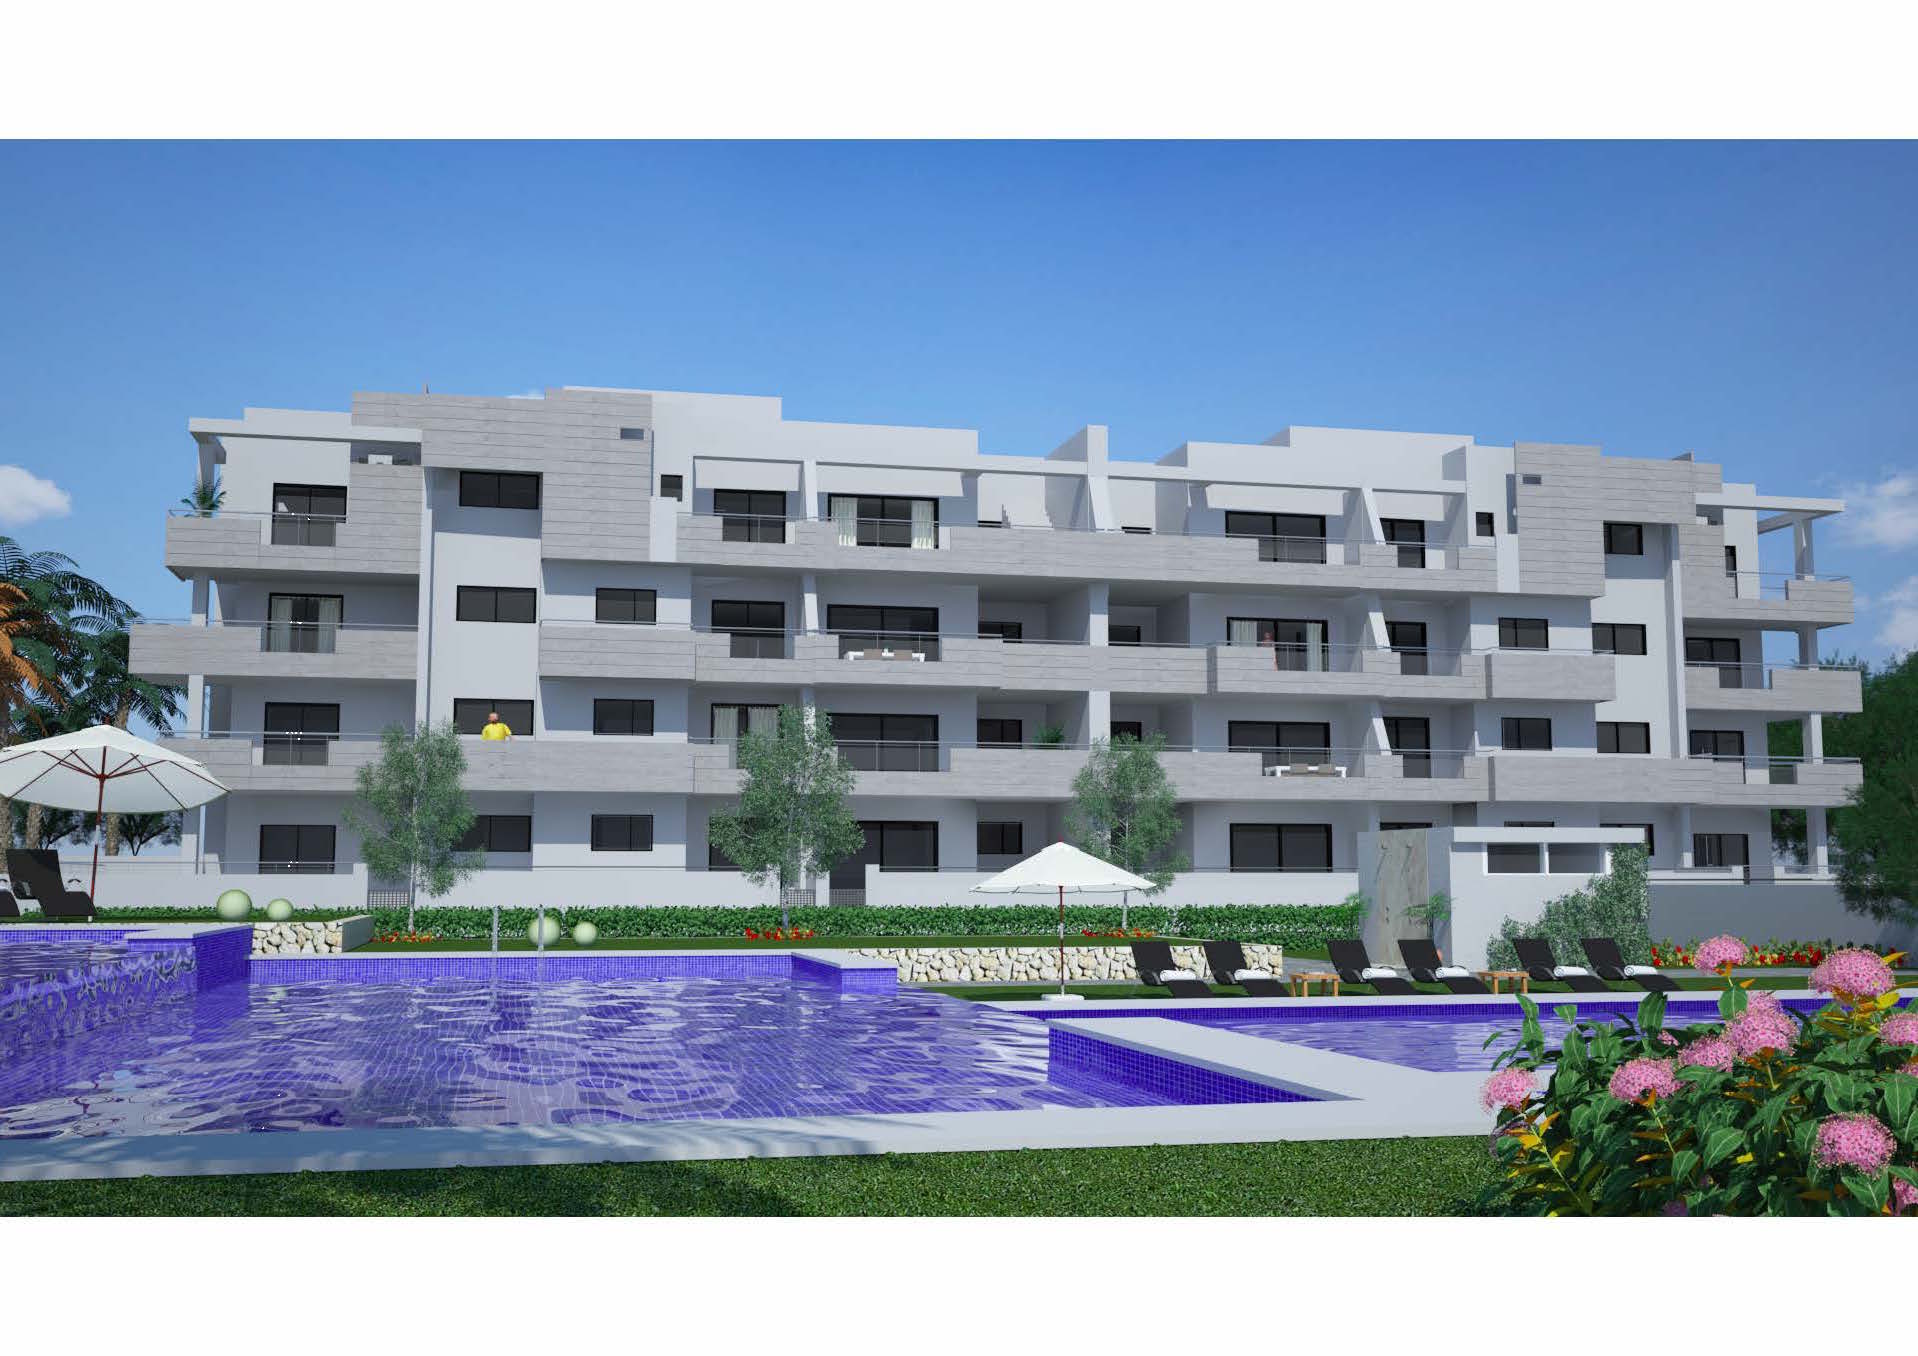 New build apartments just 1 km. from Zenia Boulevard.